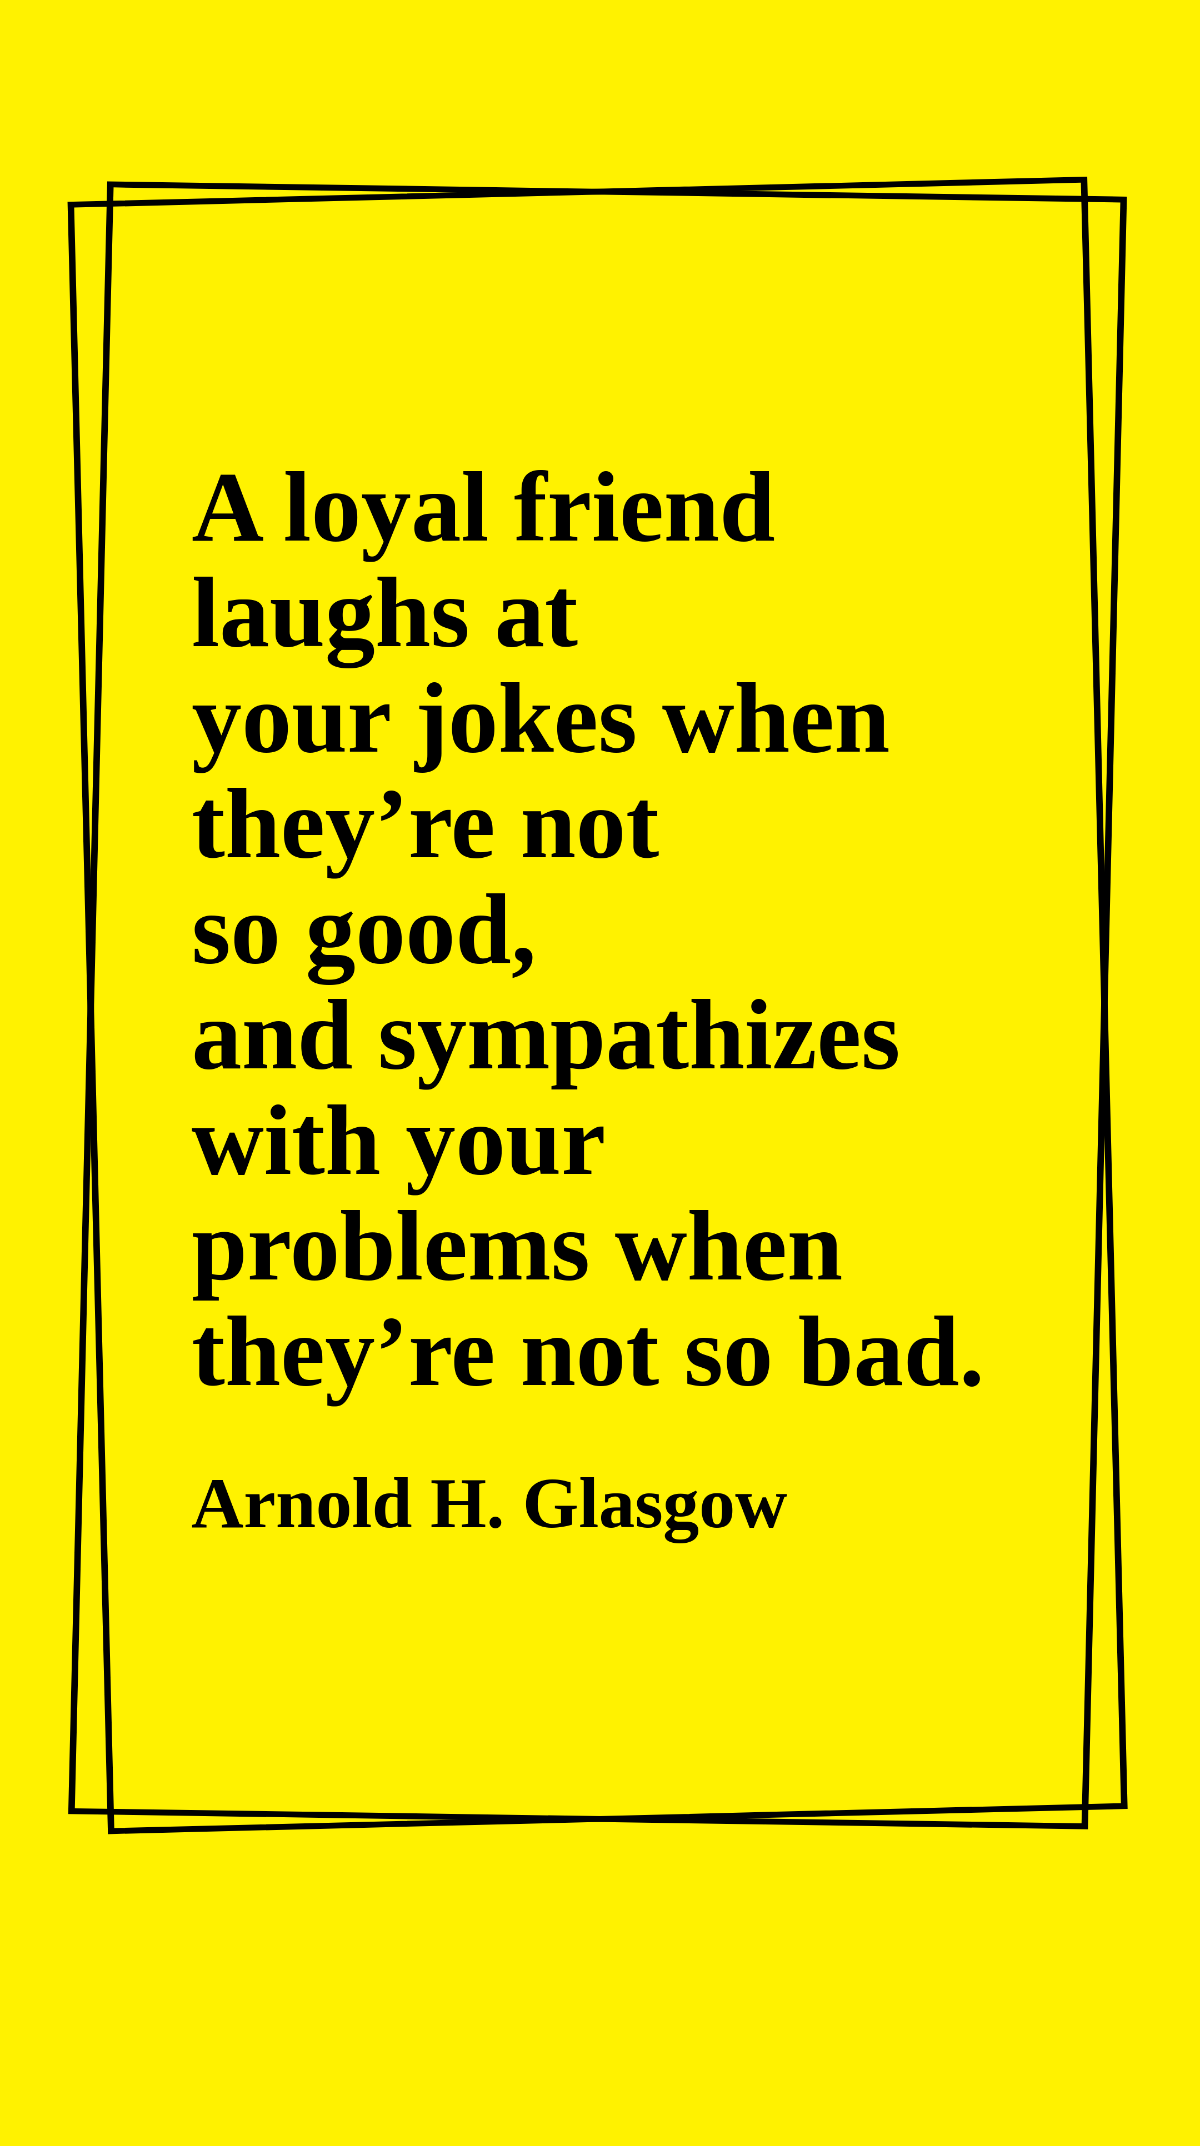 Arnold H. Glasgow - A loyal friend laughs at your jokes when they’re not so good, and sympathizes with your problems when they’re not so bad. Template